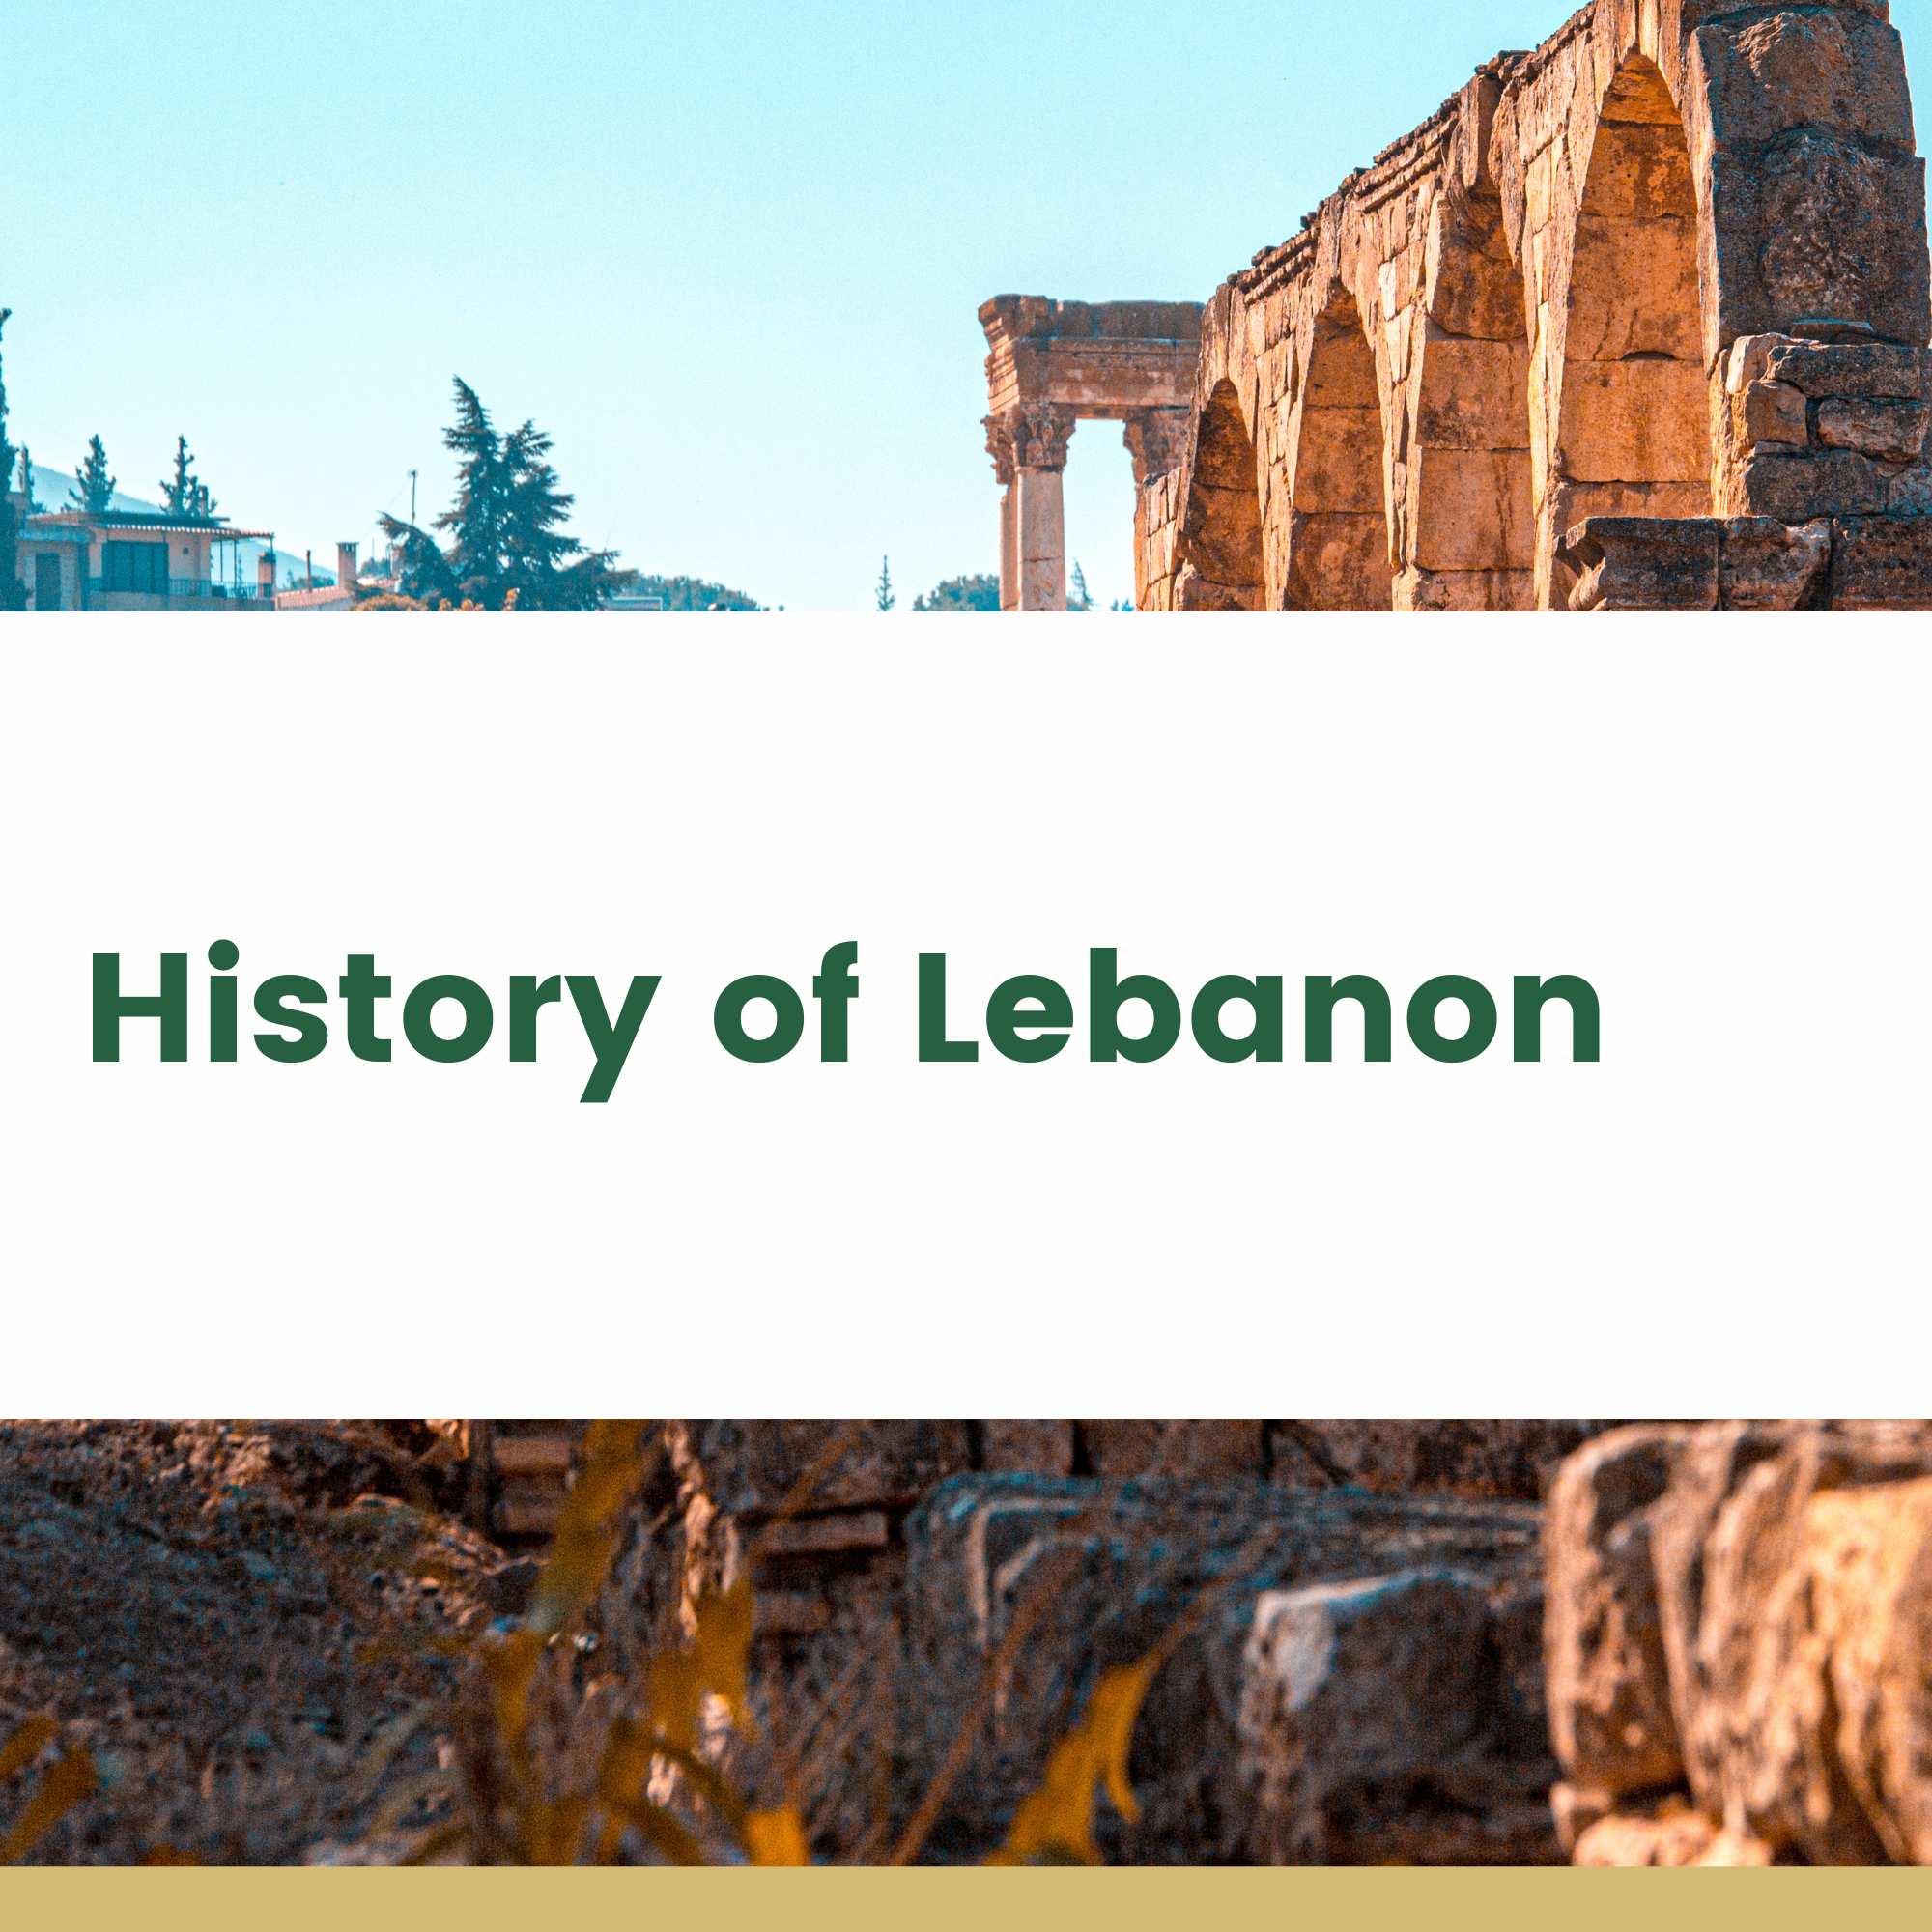 History of Lebanon - Historical Landmarks, Facts, and Information